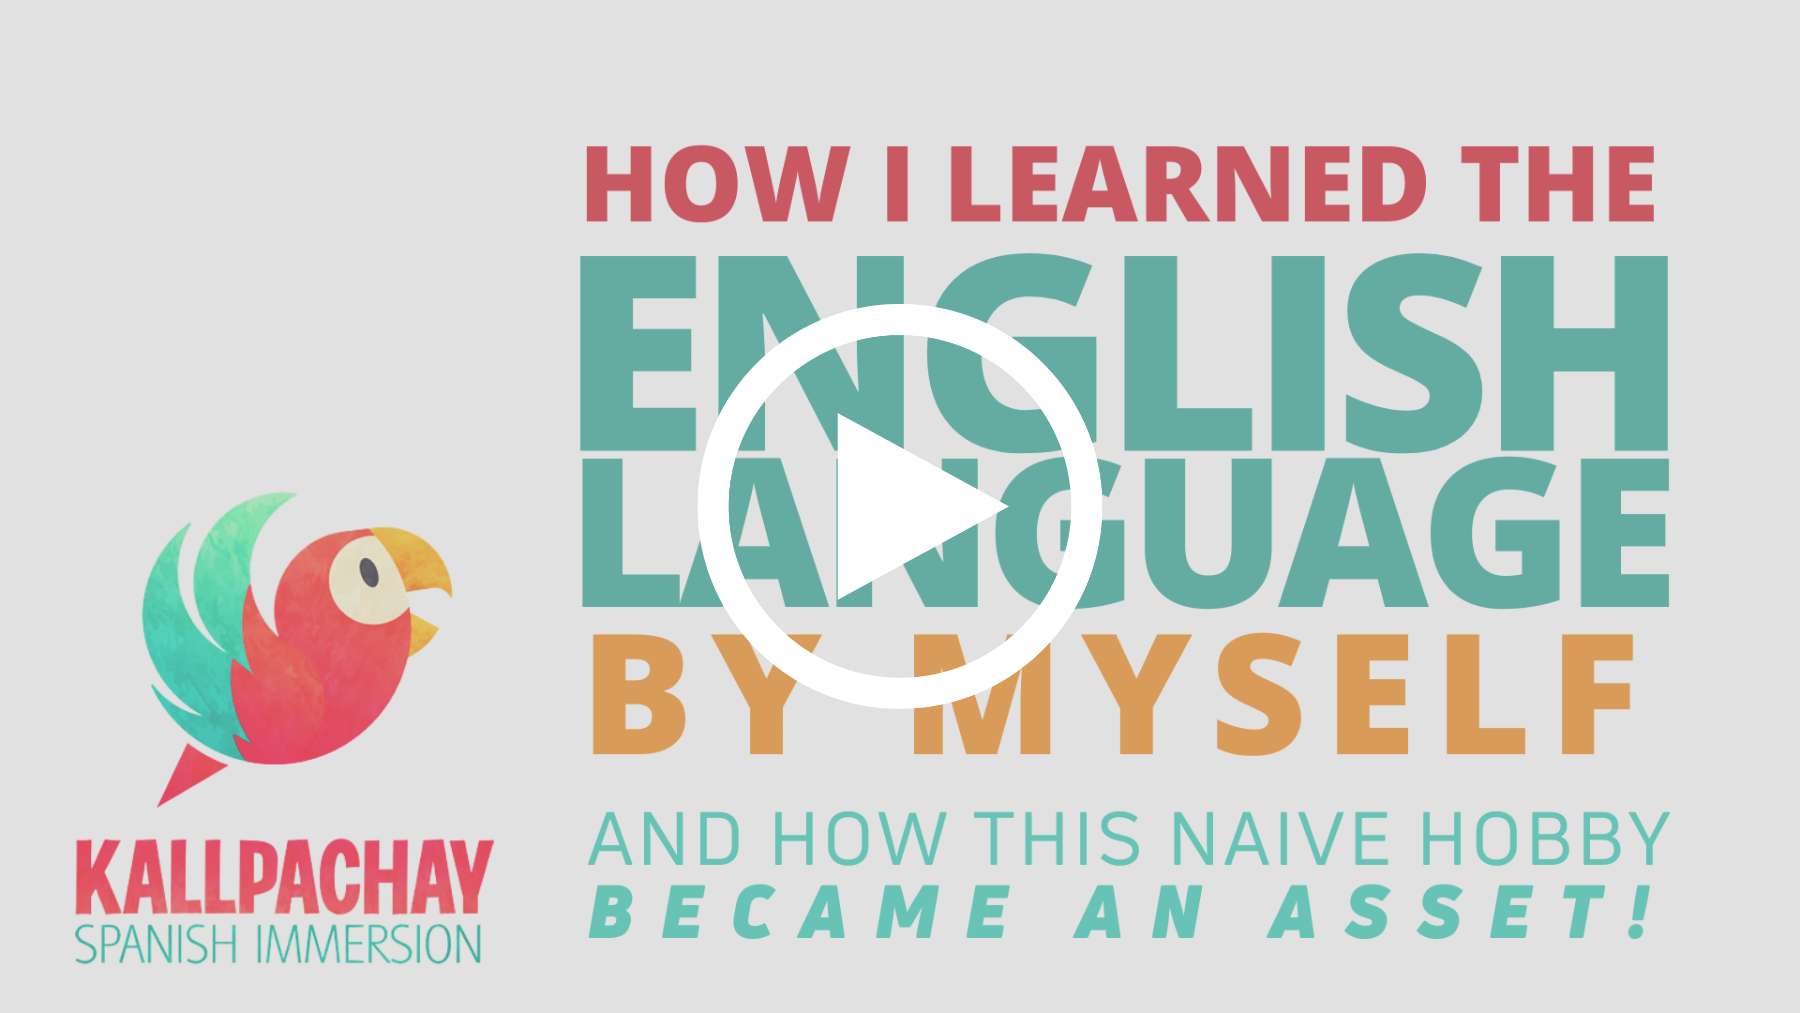 How #easy is to #learn another language? How technology can help? Discover a #TRUE #story about a lille child and his journey to learn English. Let us play a little. To learn is FUN!